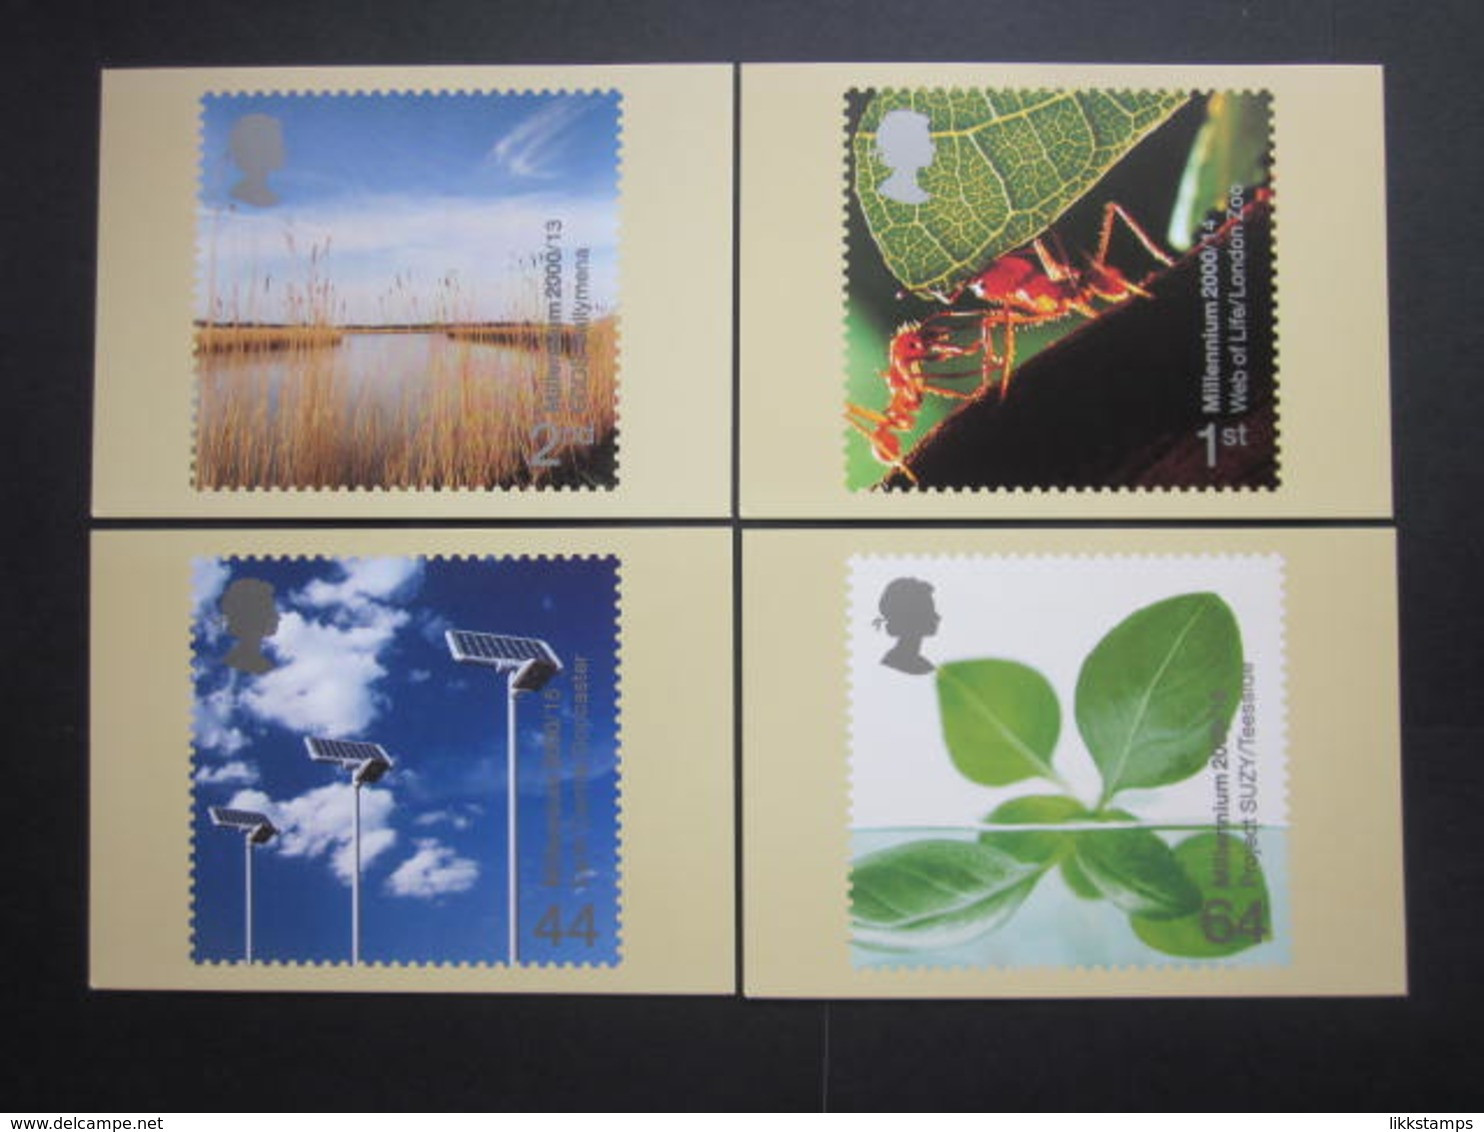 2000 'LIFE AND EARTH' STAMPS P.H.Q. CARDS UNUSED, ISSUE No. 218 #00637 - Cartes PHQ